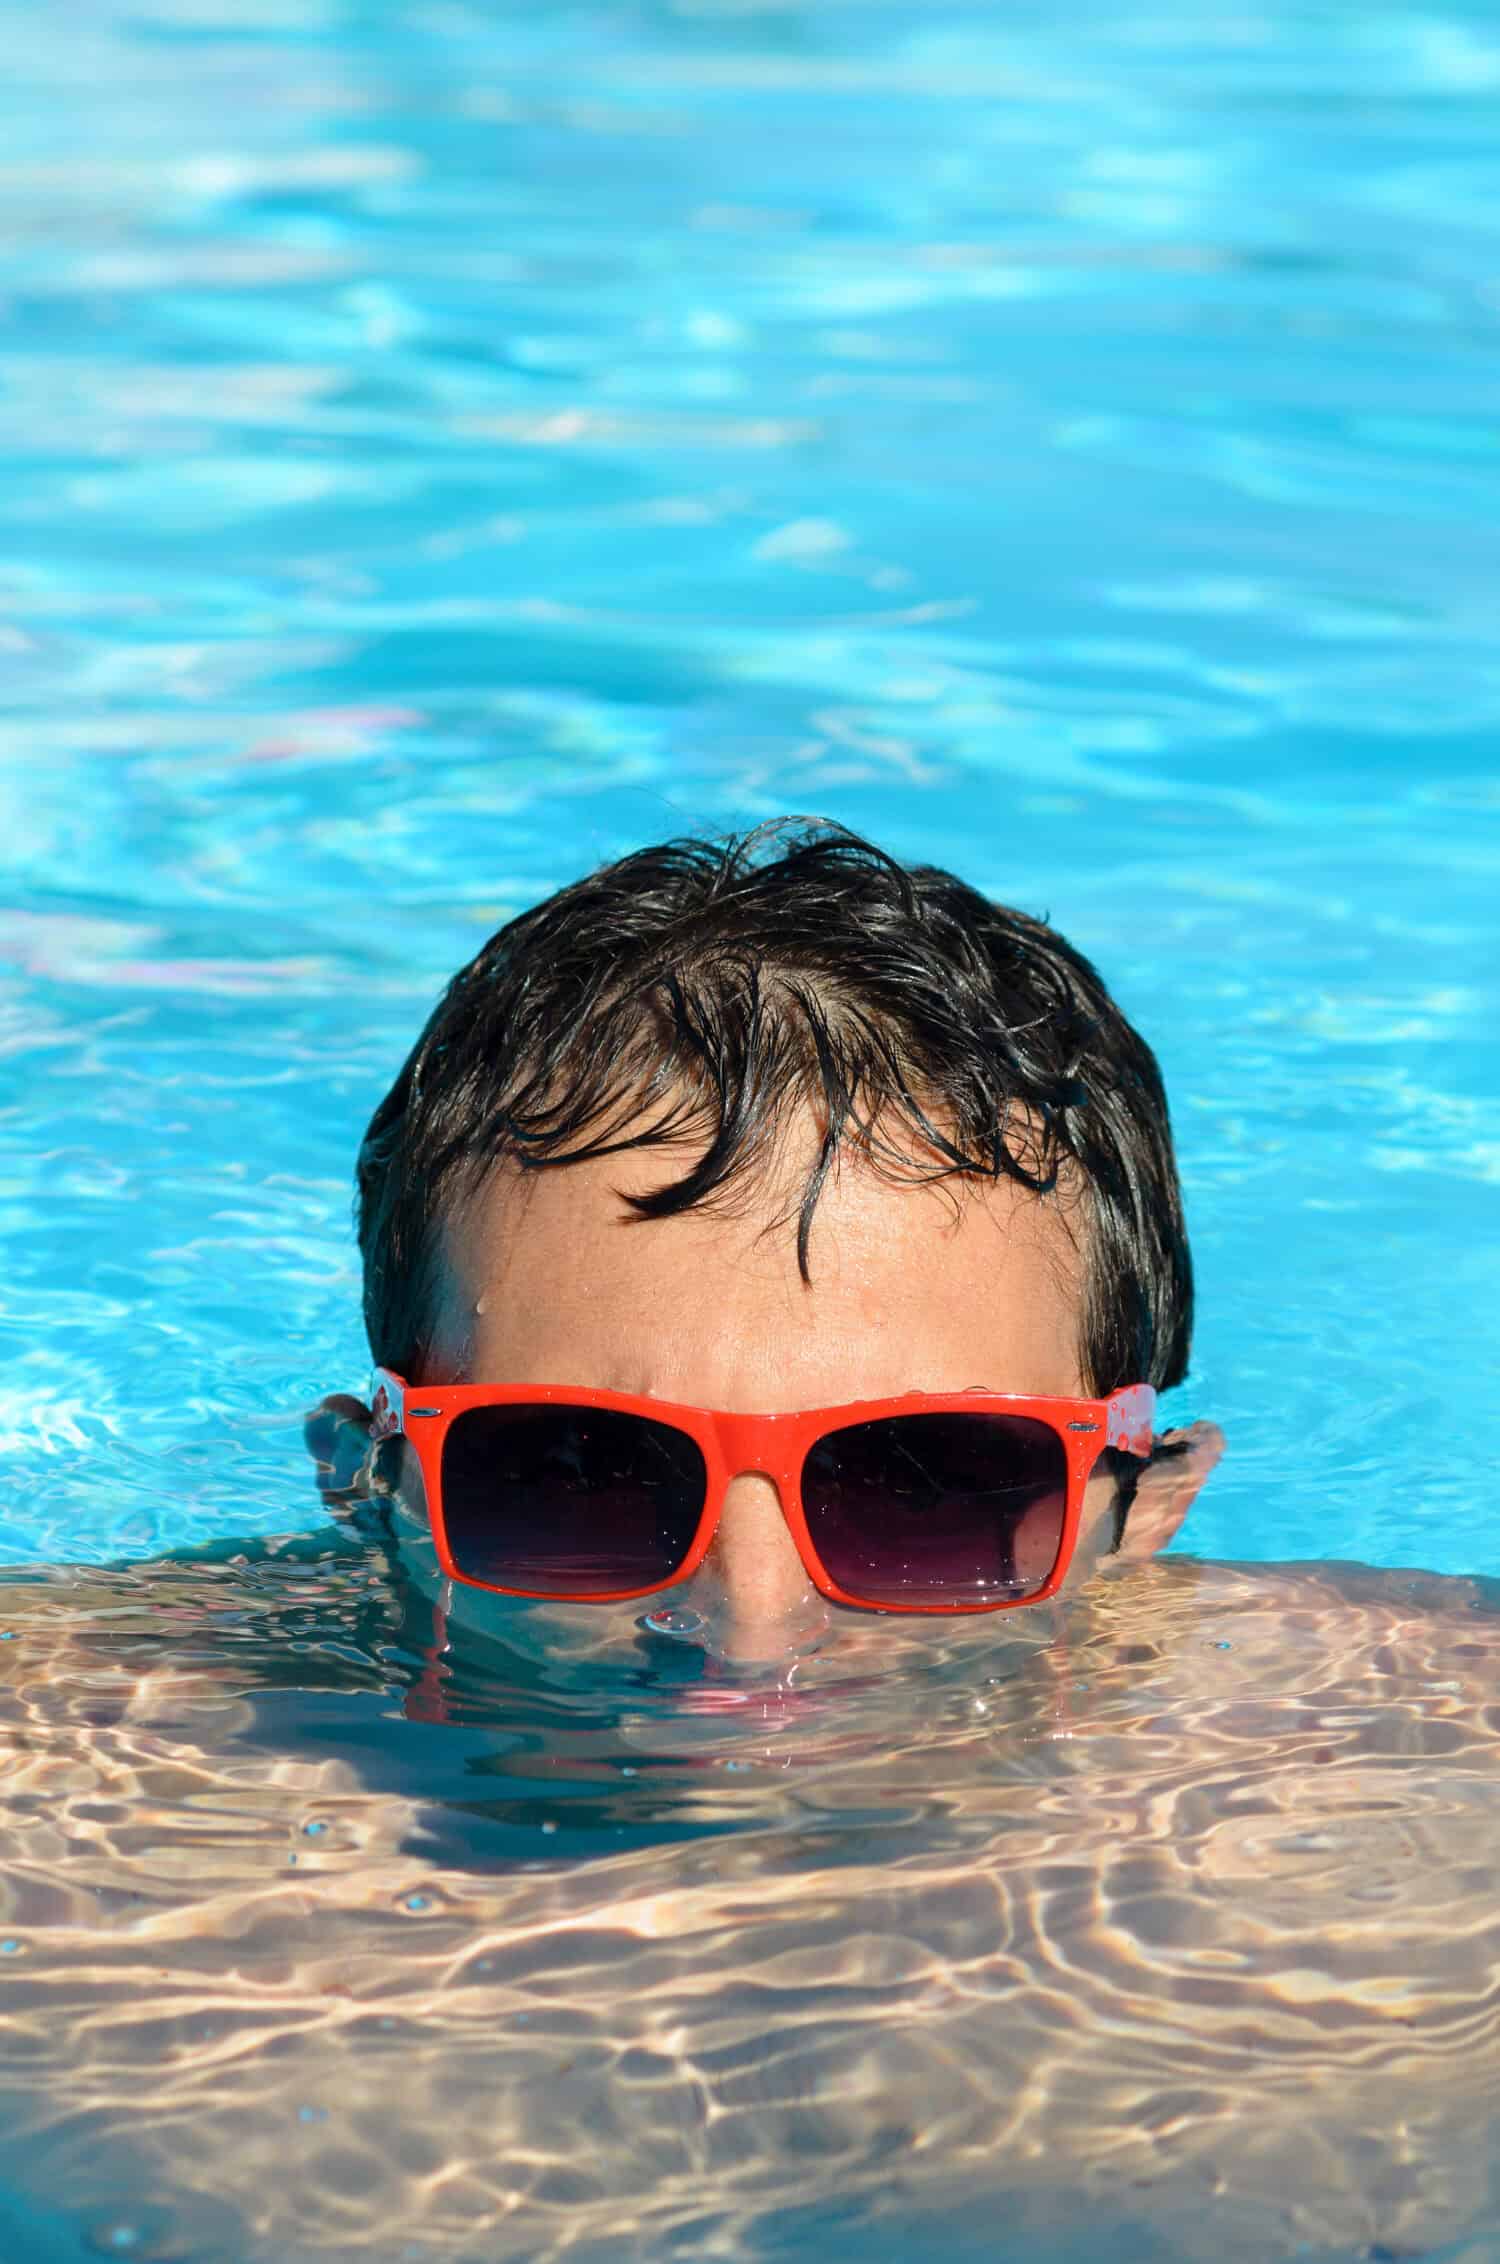 Man in pool having fun on summer holidays. Young man swimming and lurking on vacation. Half head above water stalking.